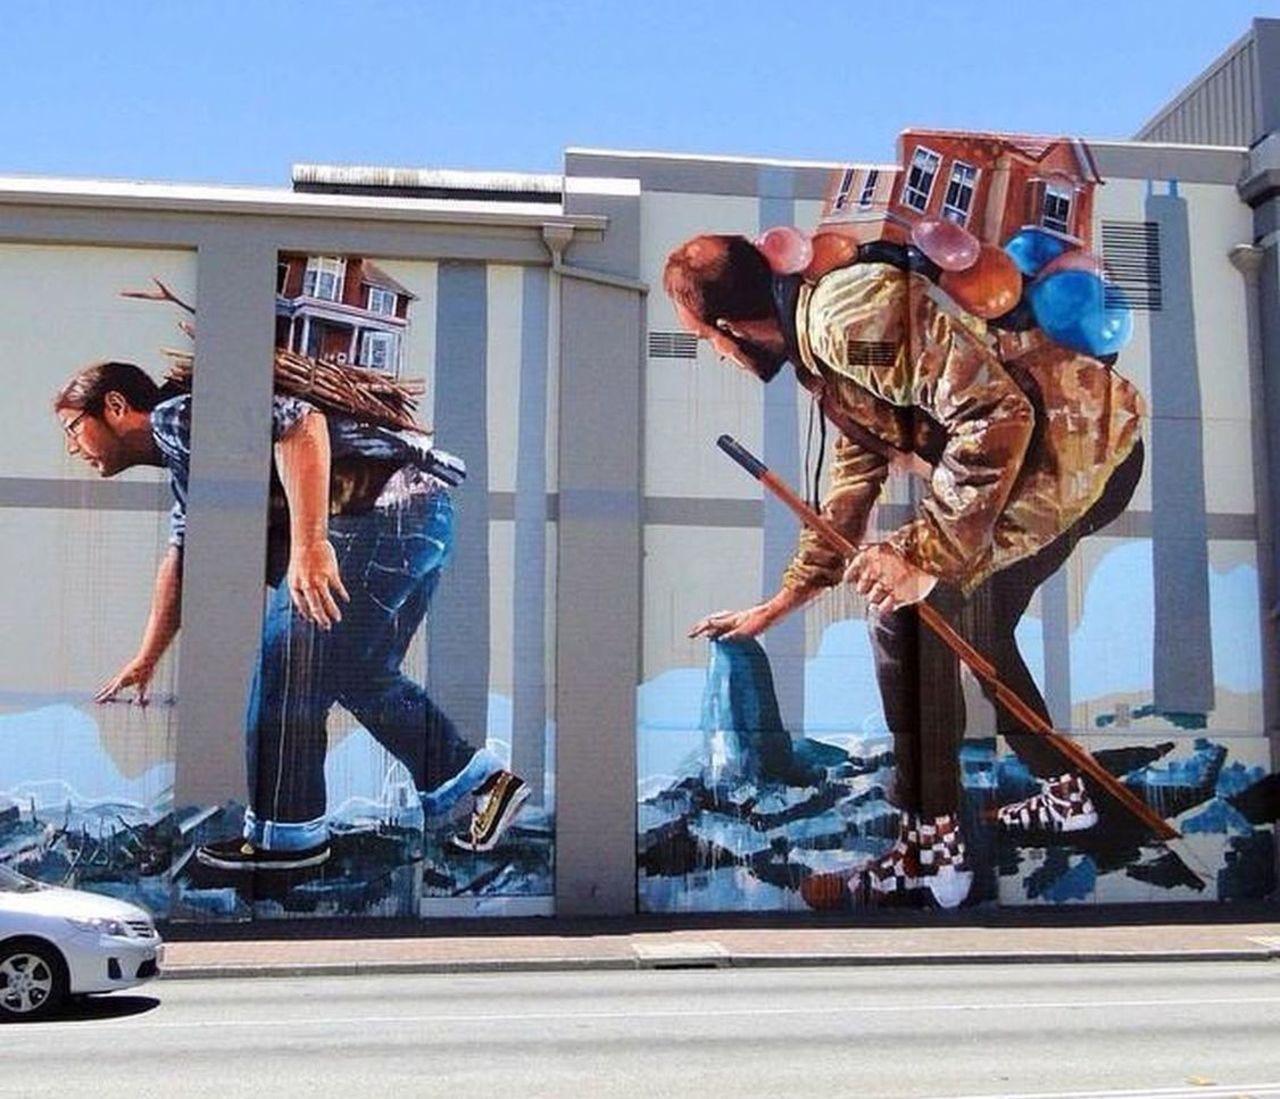 #StreetartSaturday This #Streetart is in Perth, Australia ... by #FintanMagee https://t.co/oJQFLLdbFE